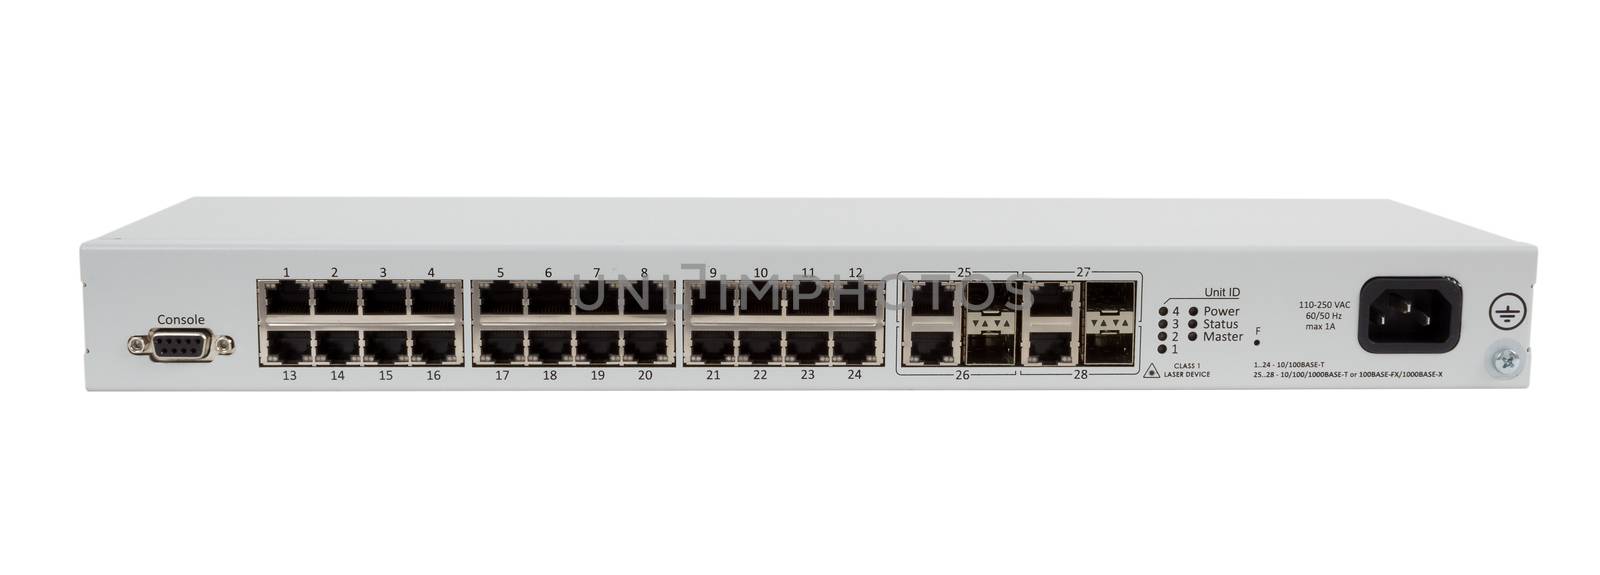 Professional network indistrial gigabit switch isolated on white background with combo SFP ports